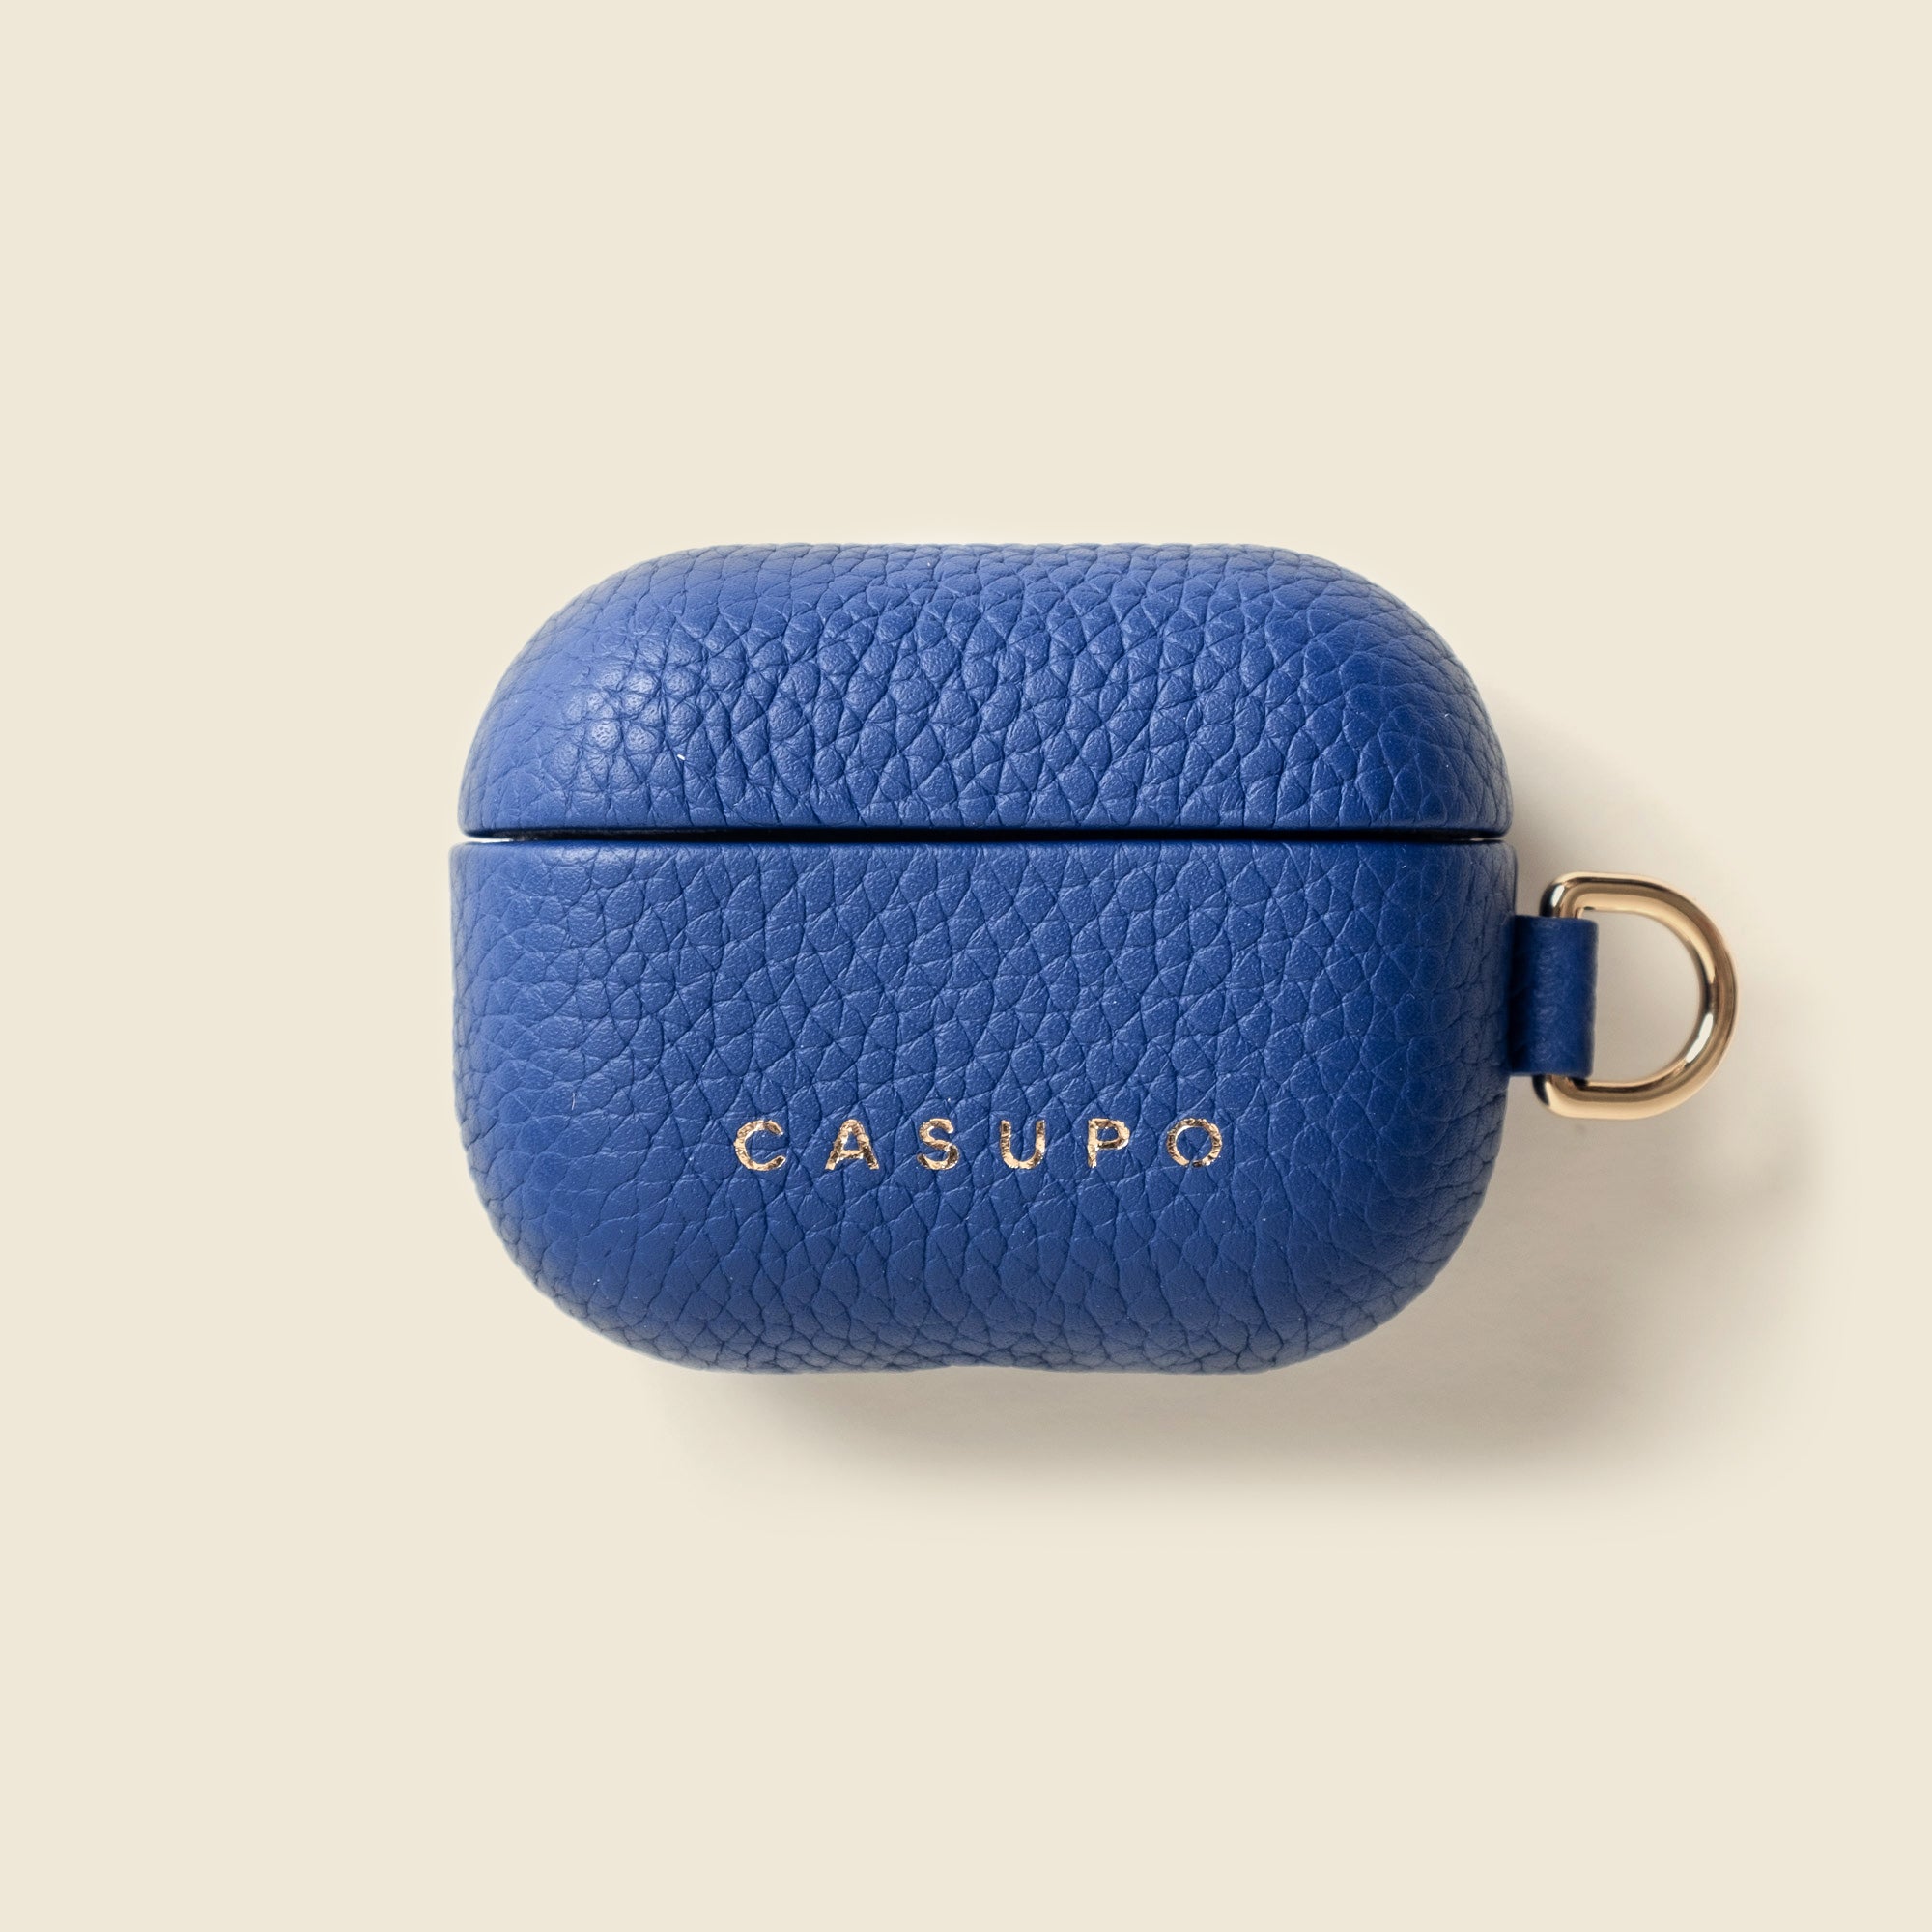 Blue leather airpod case with key ring